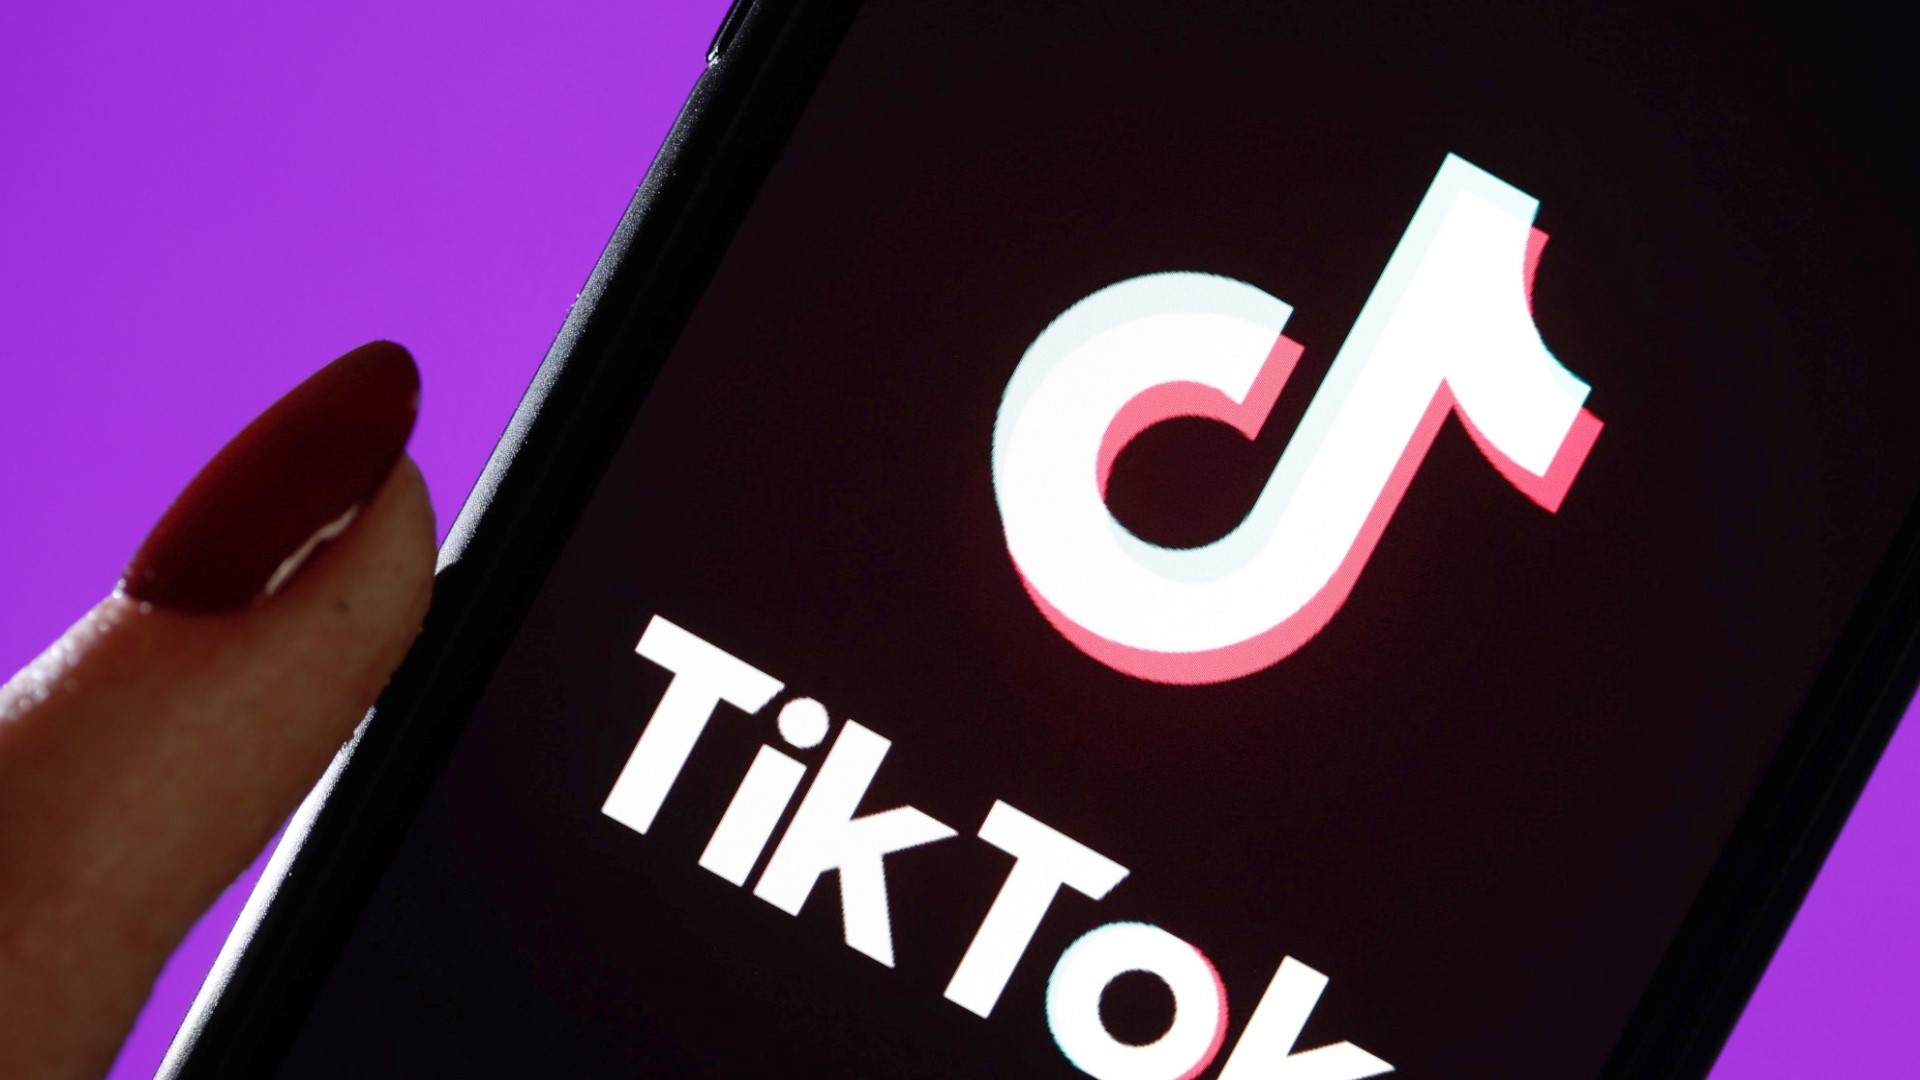 Secretary of State Mike Pompeo says the Trump administration could ban TikTok. Now the company is making changes.